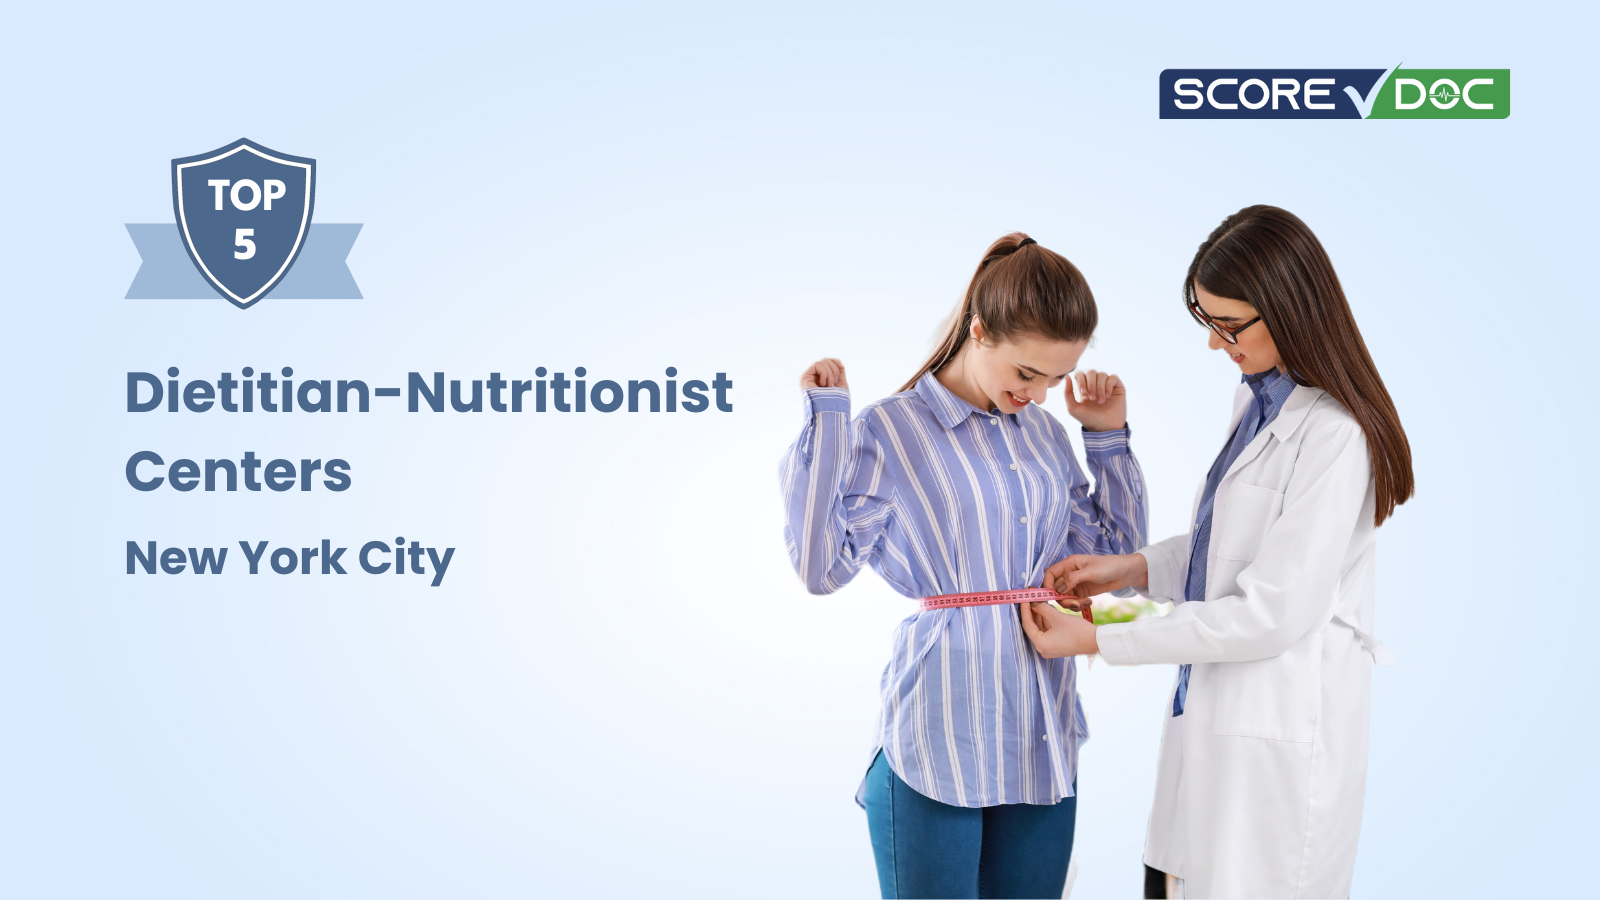 Top Rated Dietitian-Nutritionist Centers in New York City